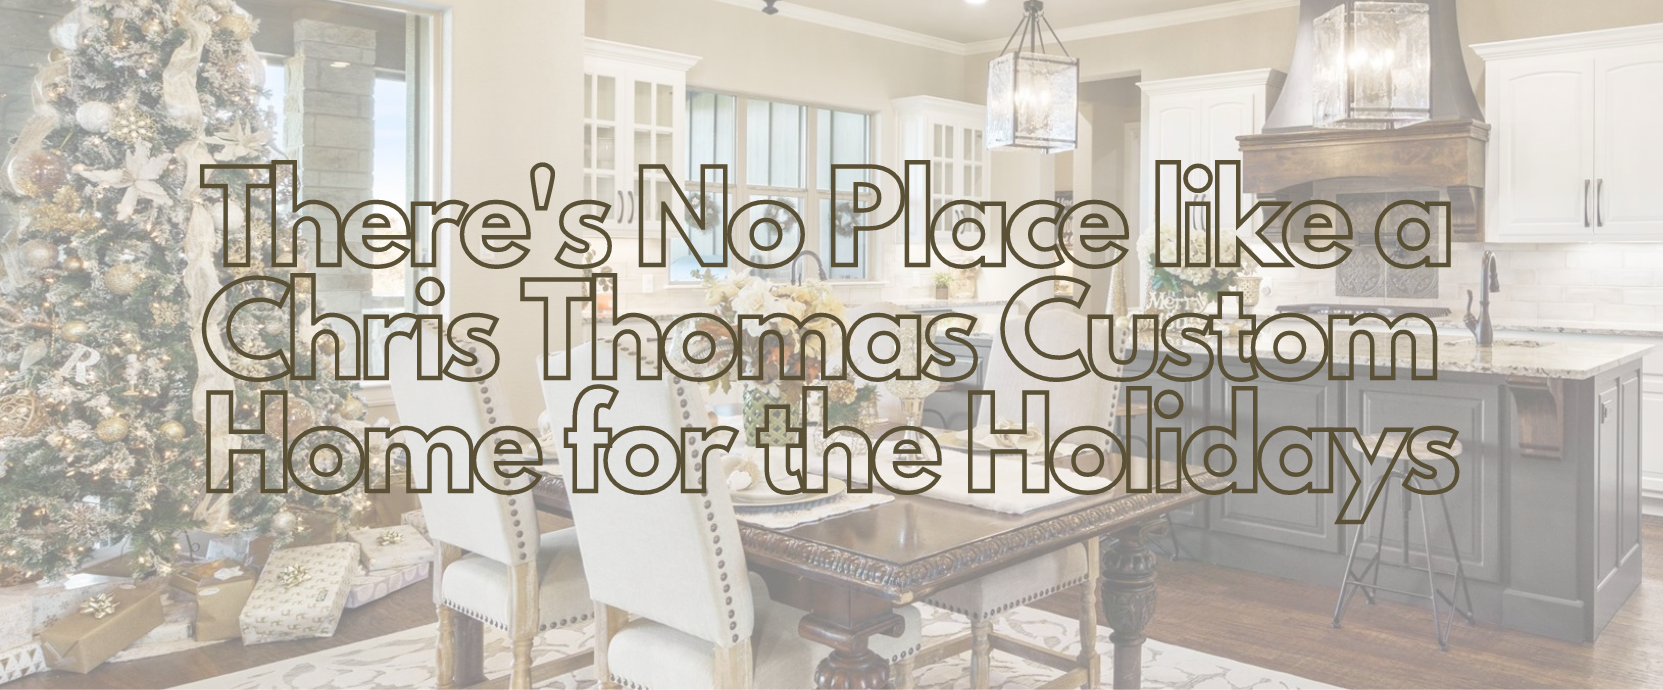 There's No Place like a Chris Thomas Custom Home for the Holidays